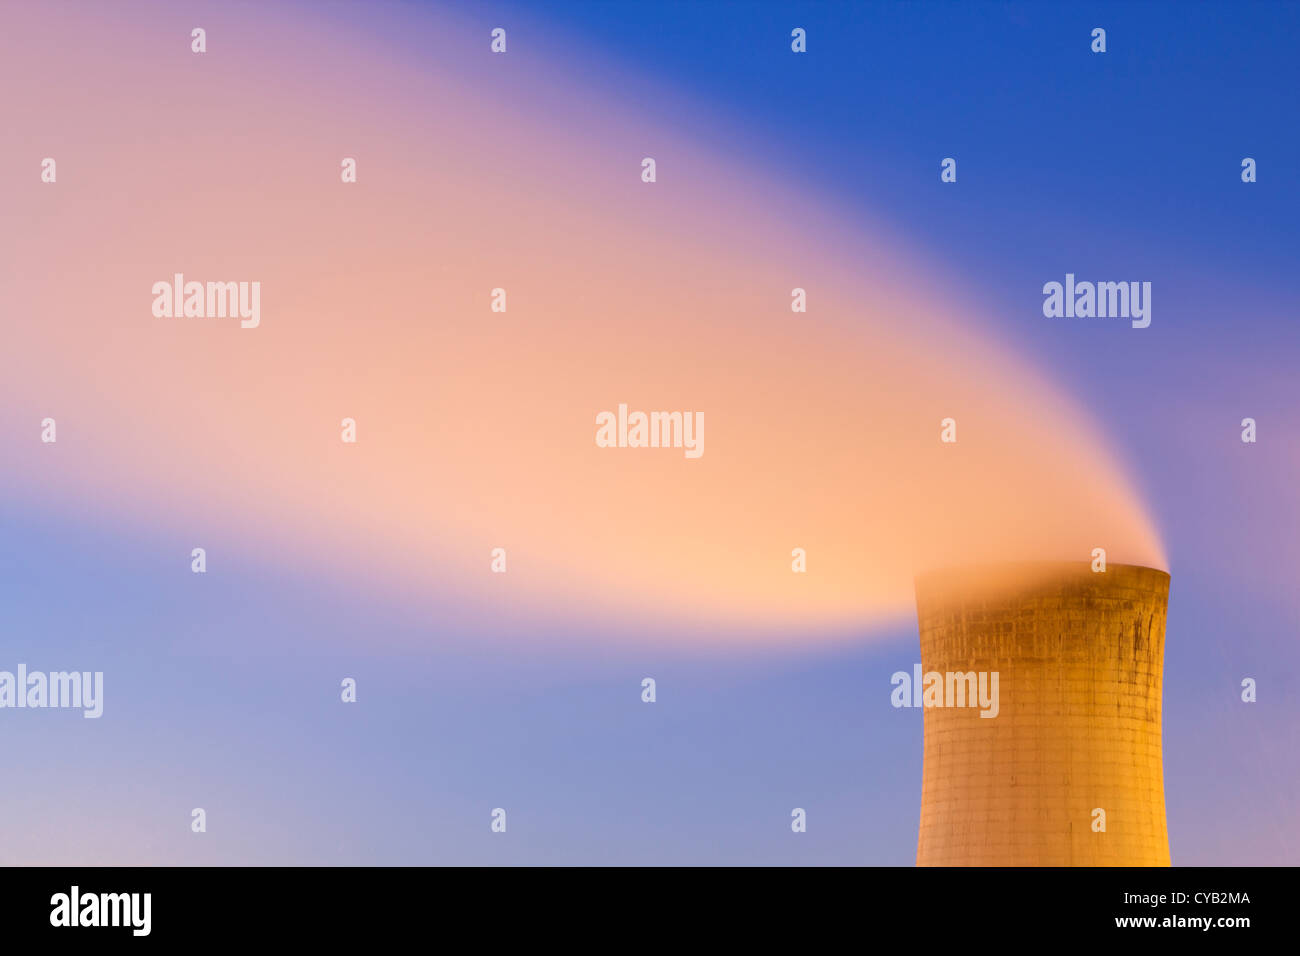 Cooling tower at chemical works in Billingam, Cleveland, England, UK Stock Photo